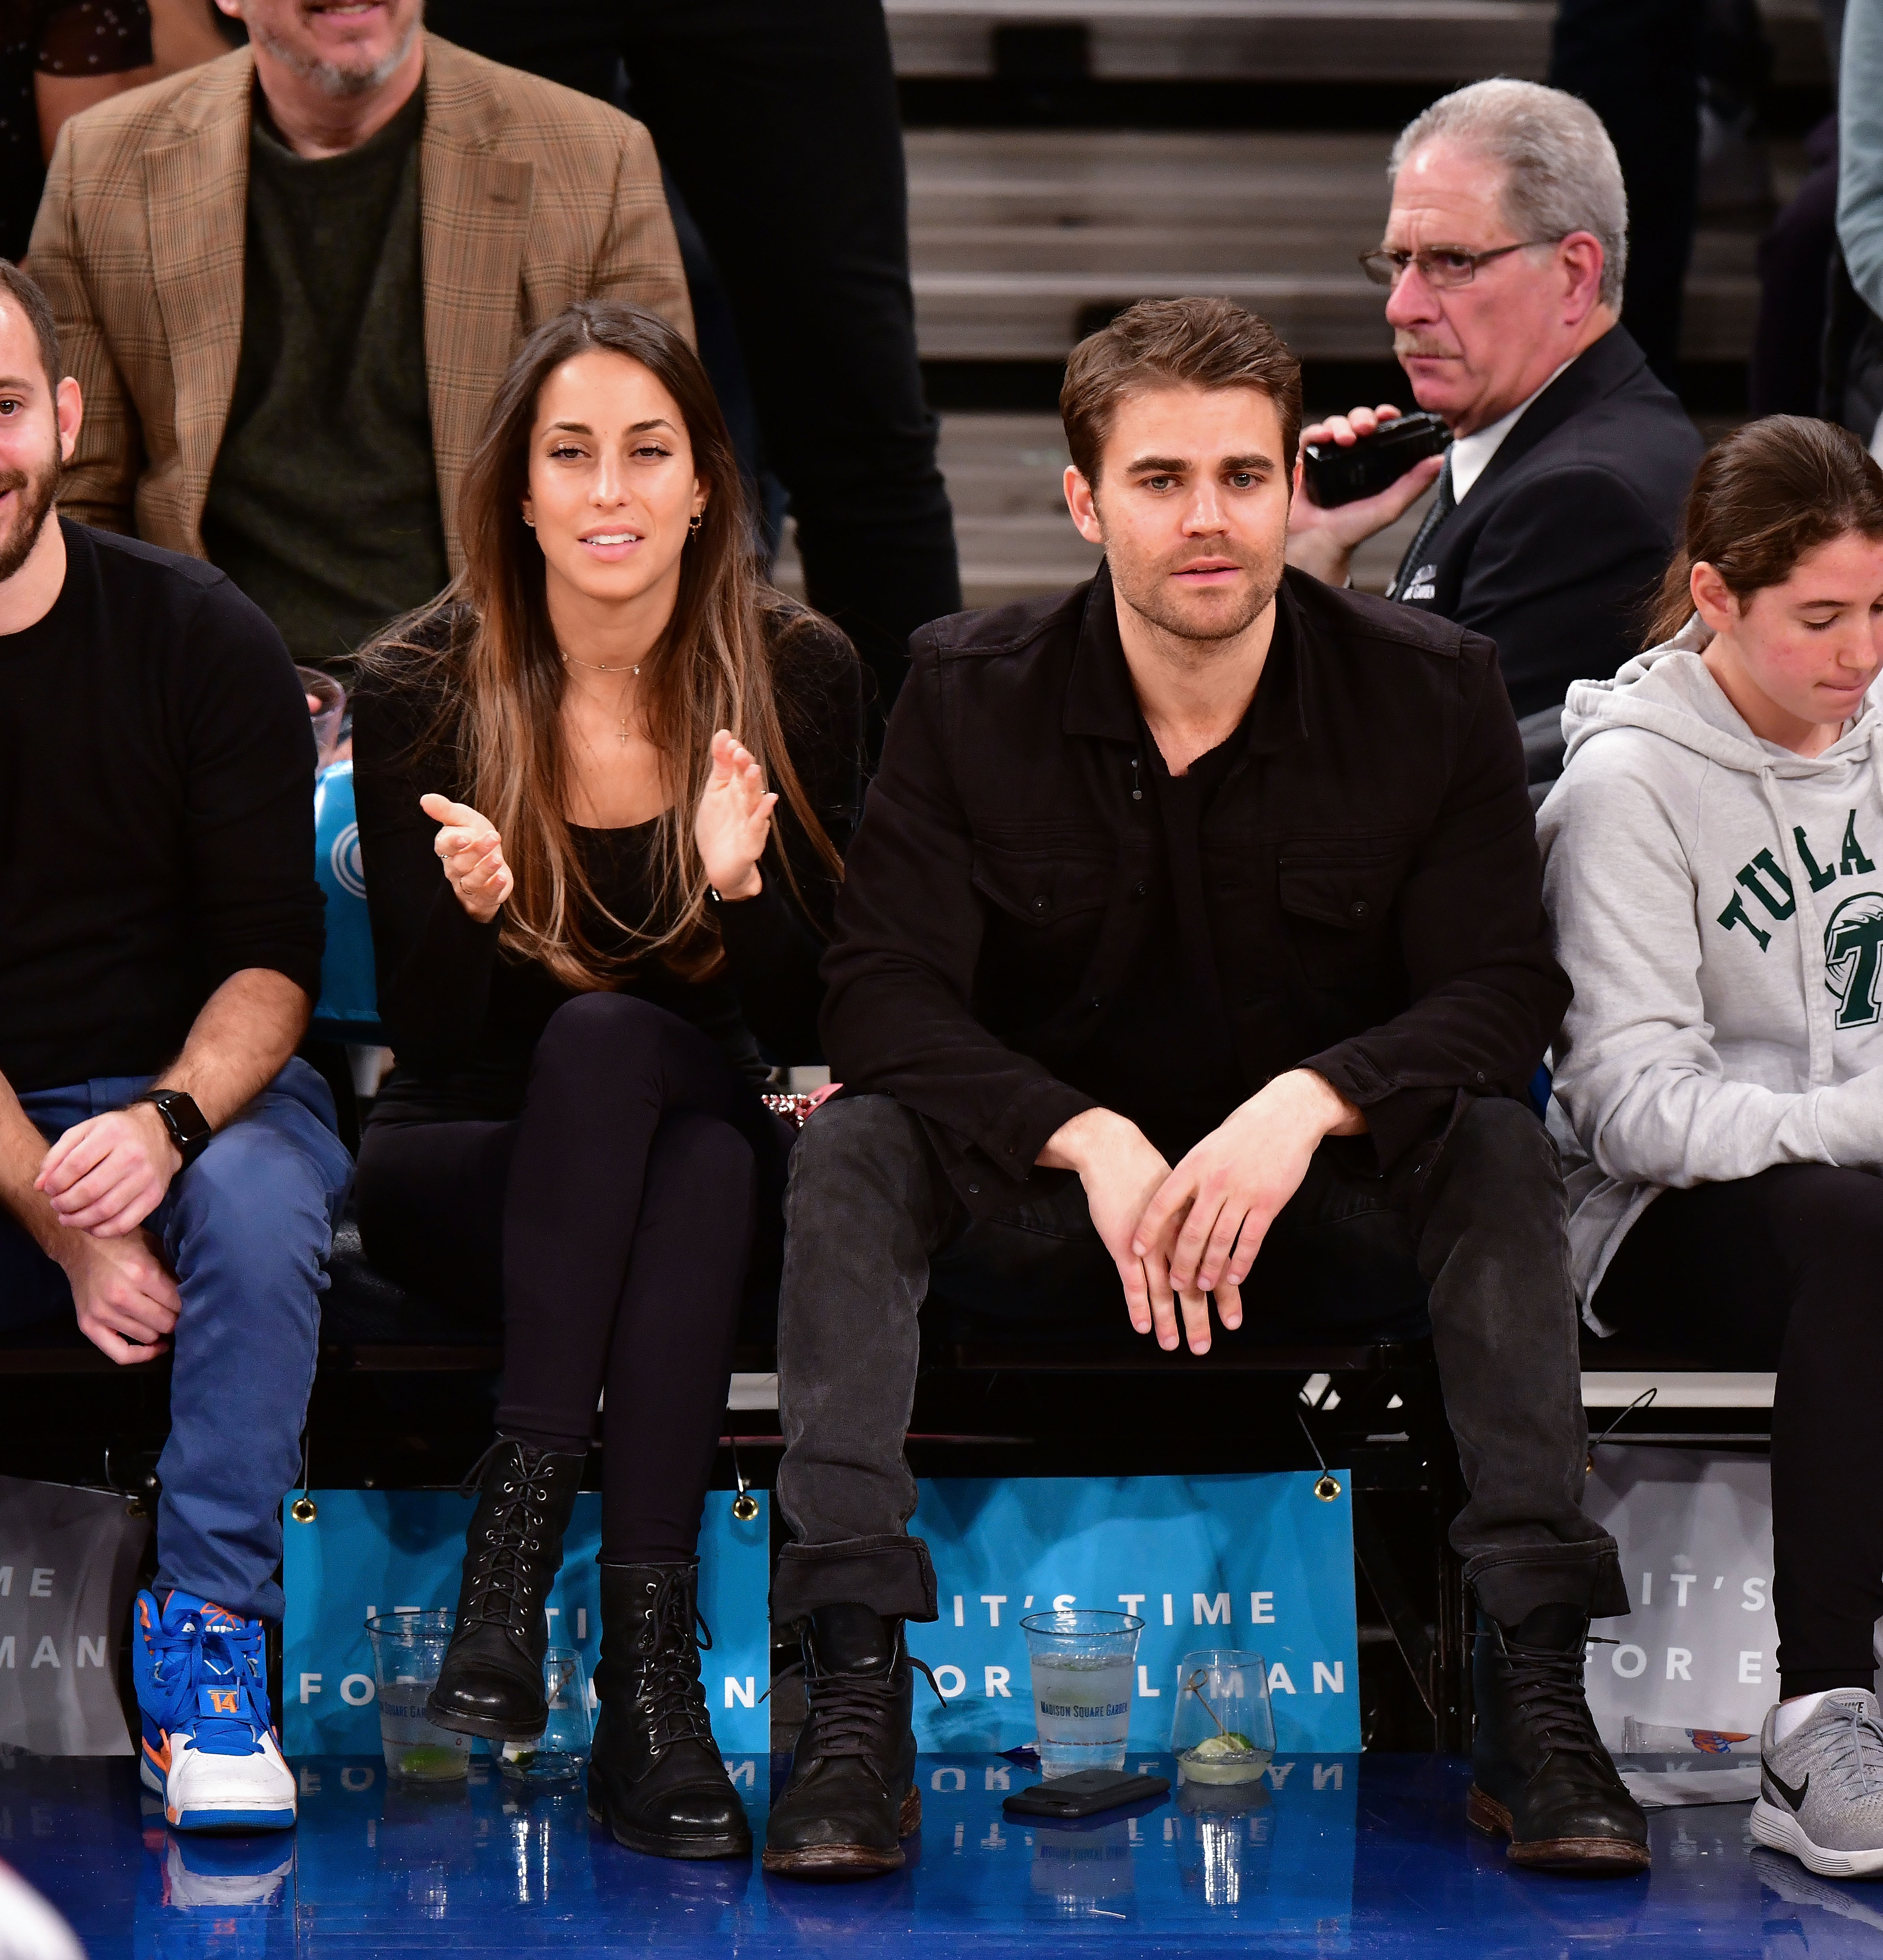 Paul Wesley and Ines De Ramon watch the Toronto Raptors vs. New York Knicks game at Madison Square Garden in New York City on November 22, 2017. | Source: Getty Images